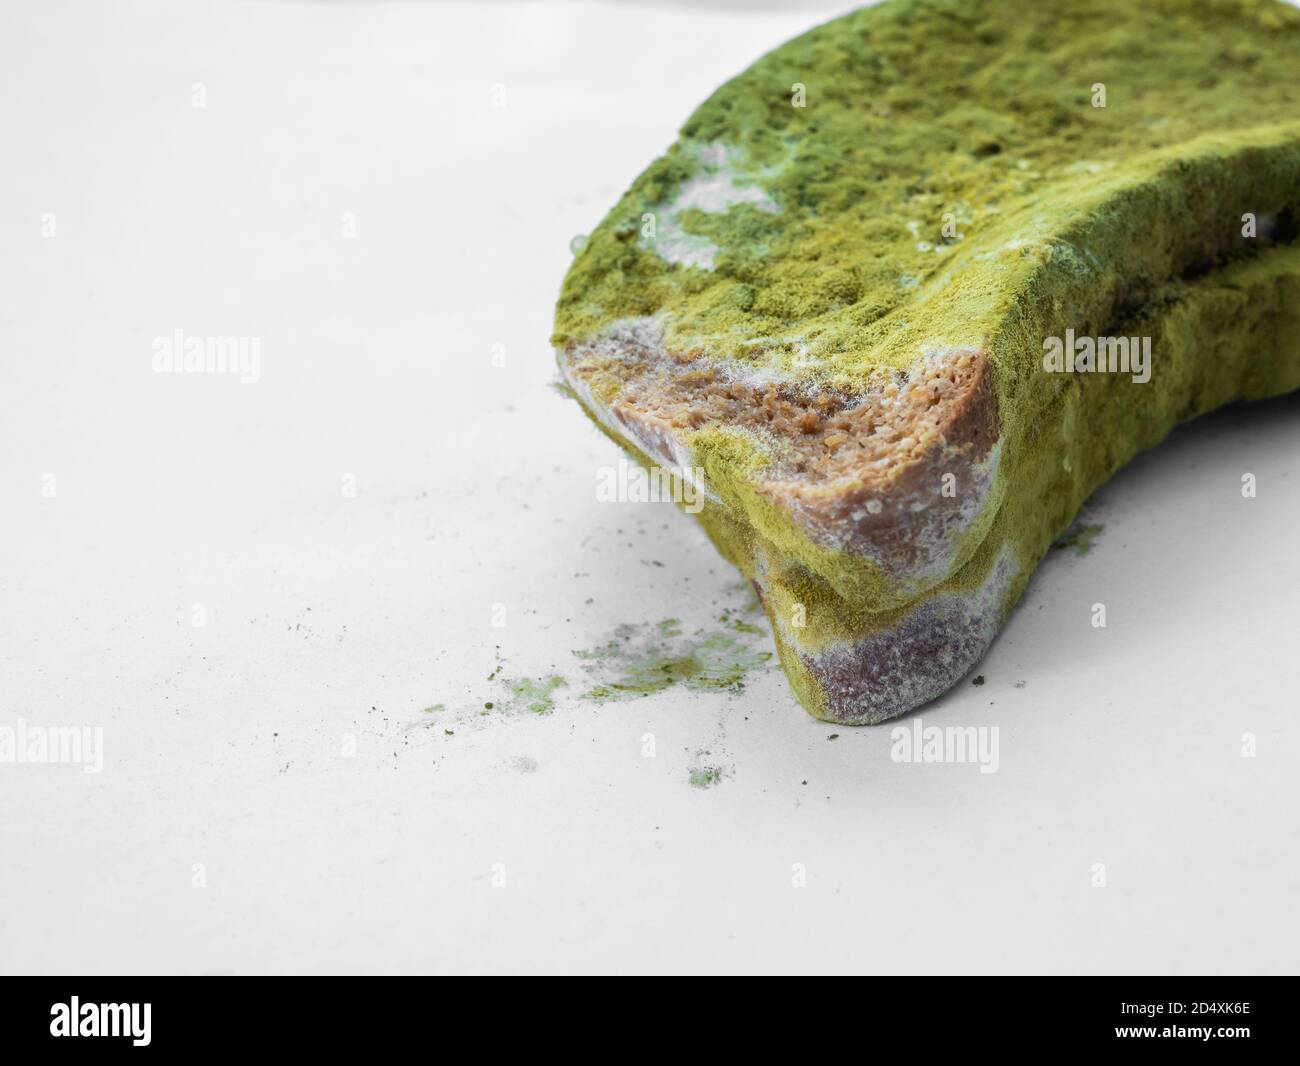 A piece of bread covered with green mold on a white background isolate. Stock Photo